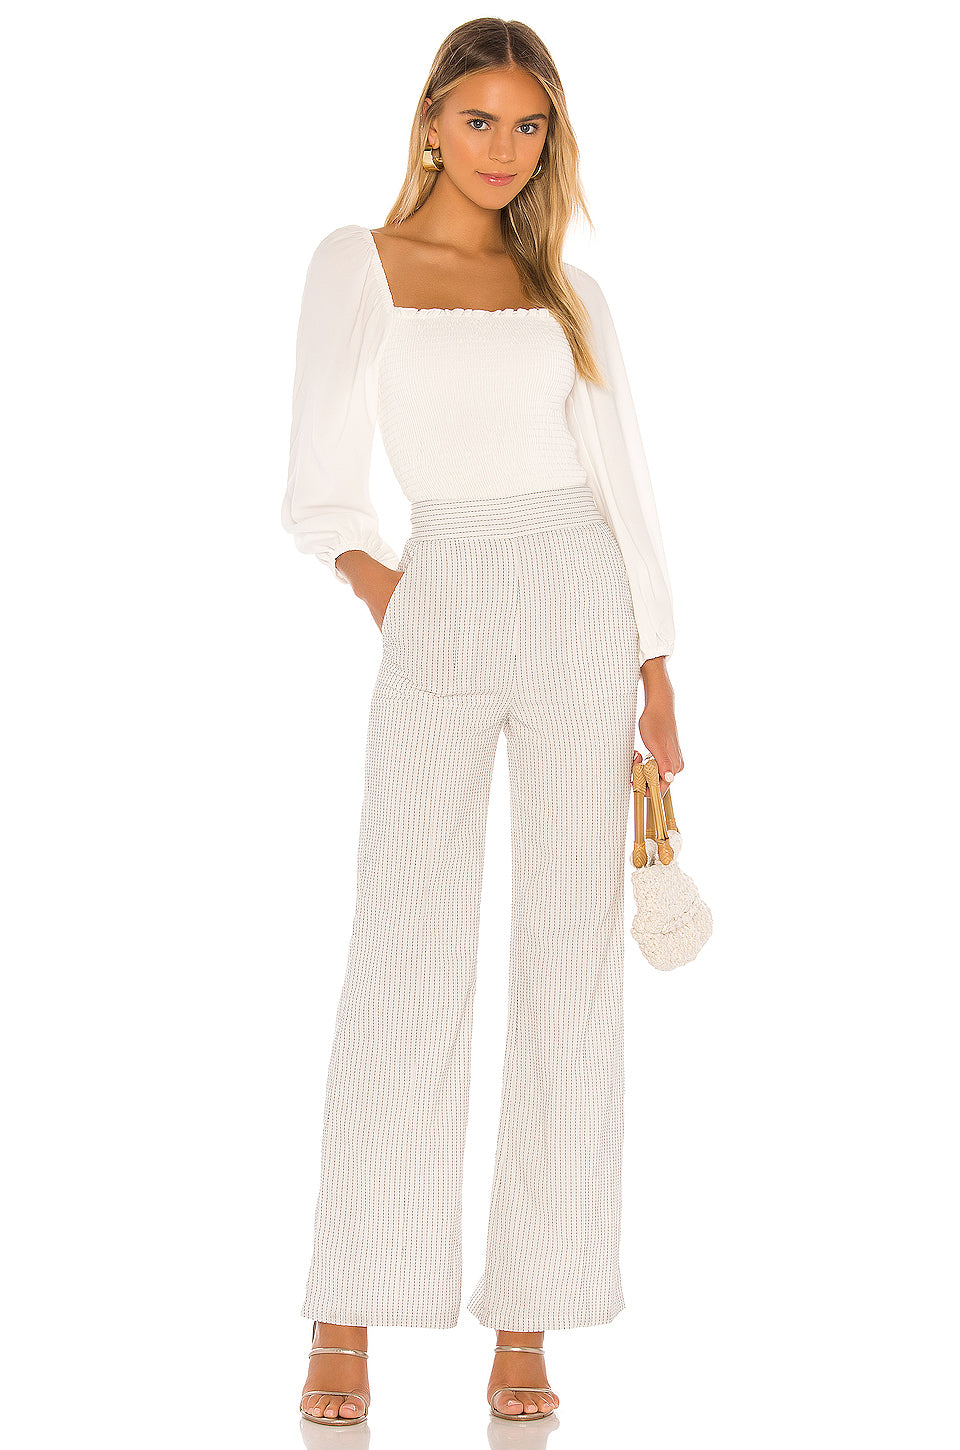 Boswell Trouser in IVORY